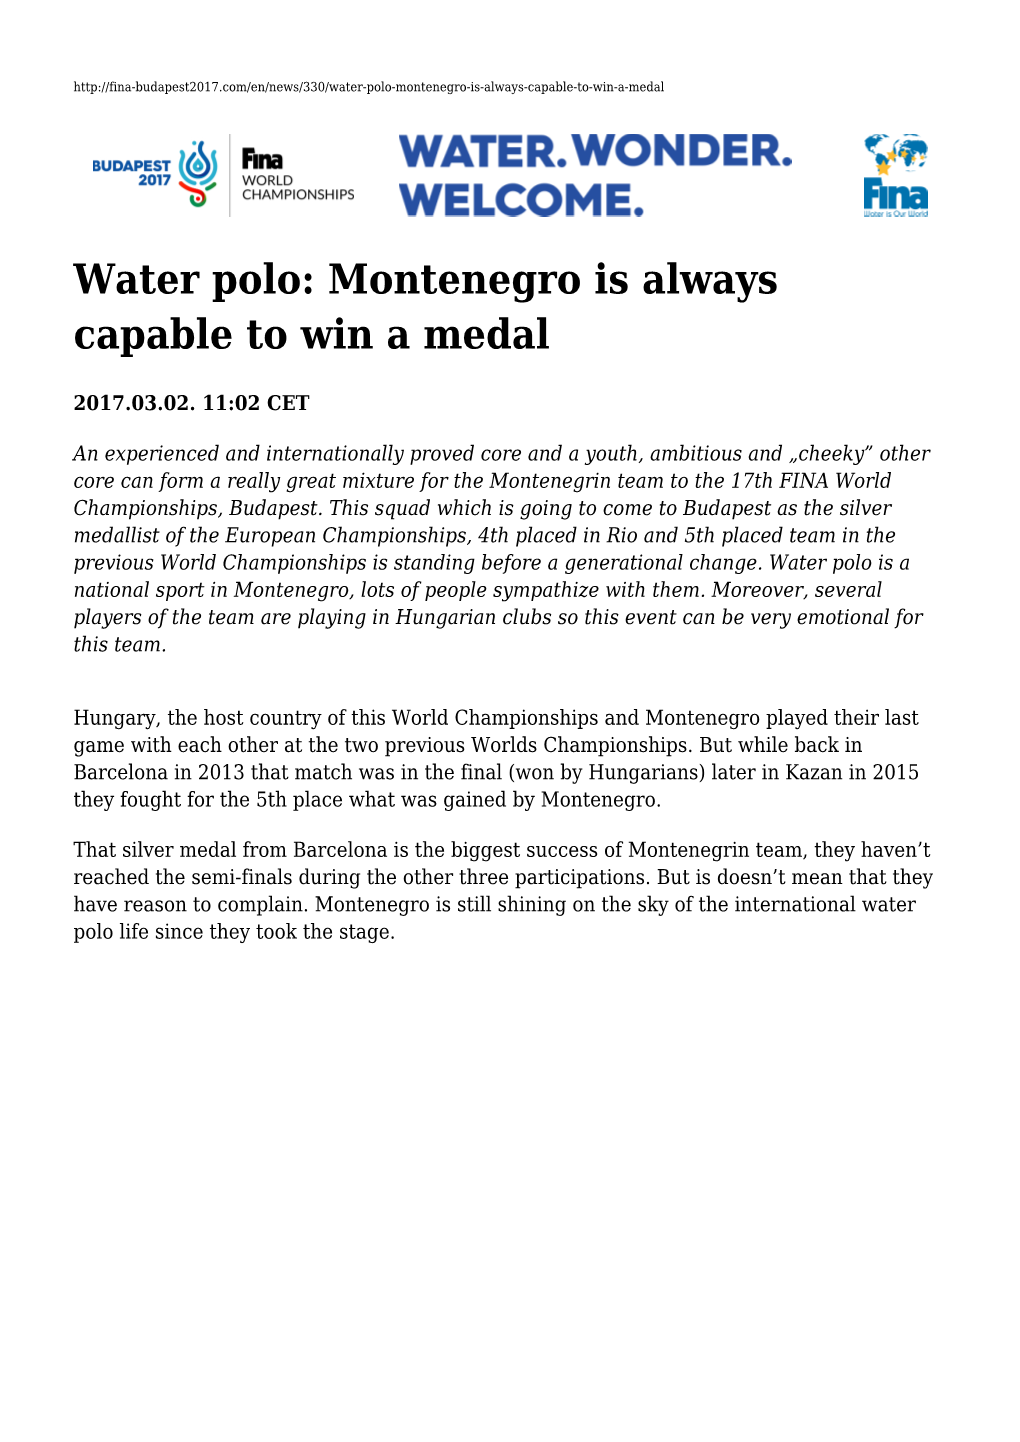 Water Polo: Montenegro Is Always Capable to Win a Medal